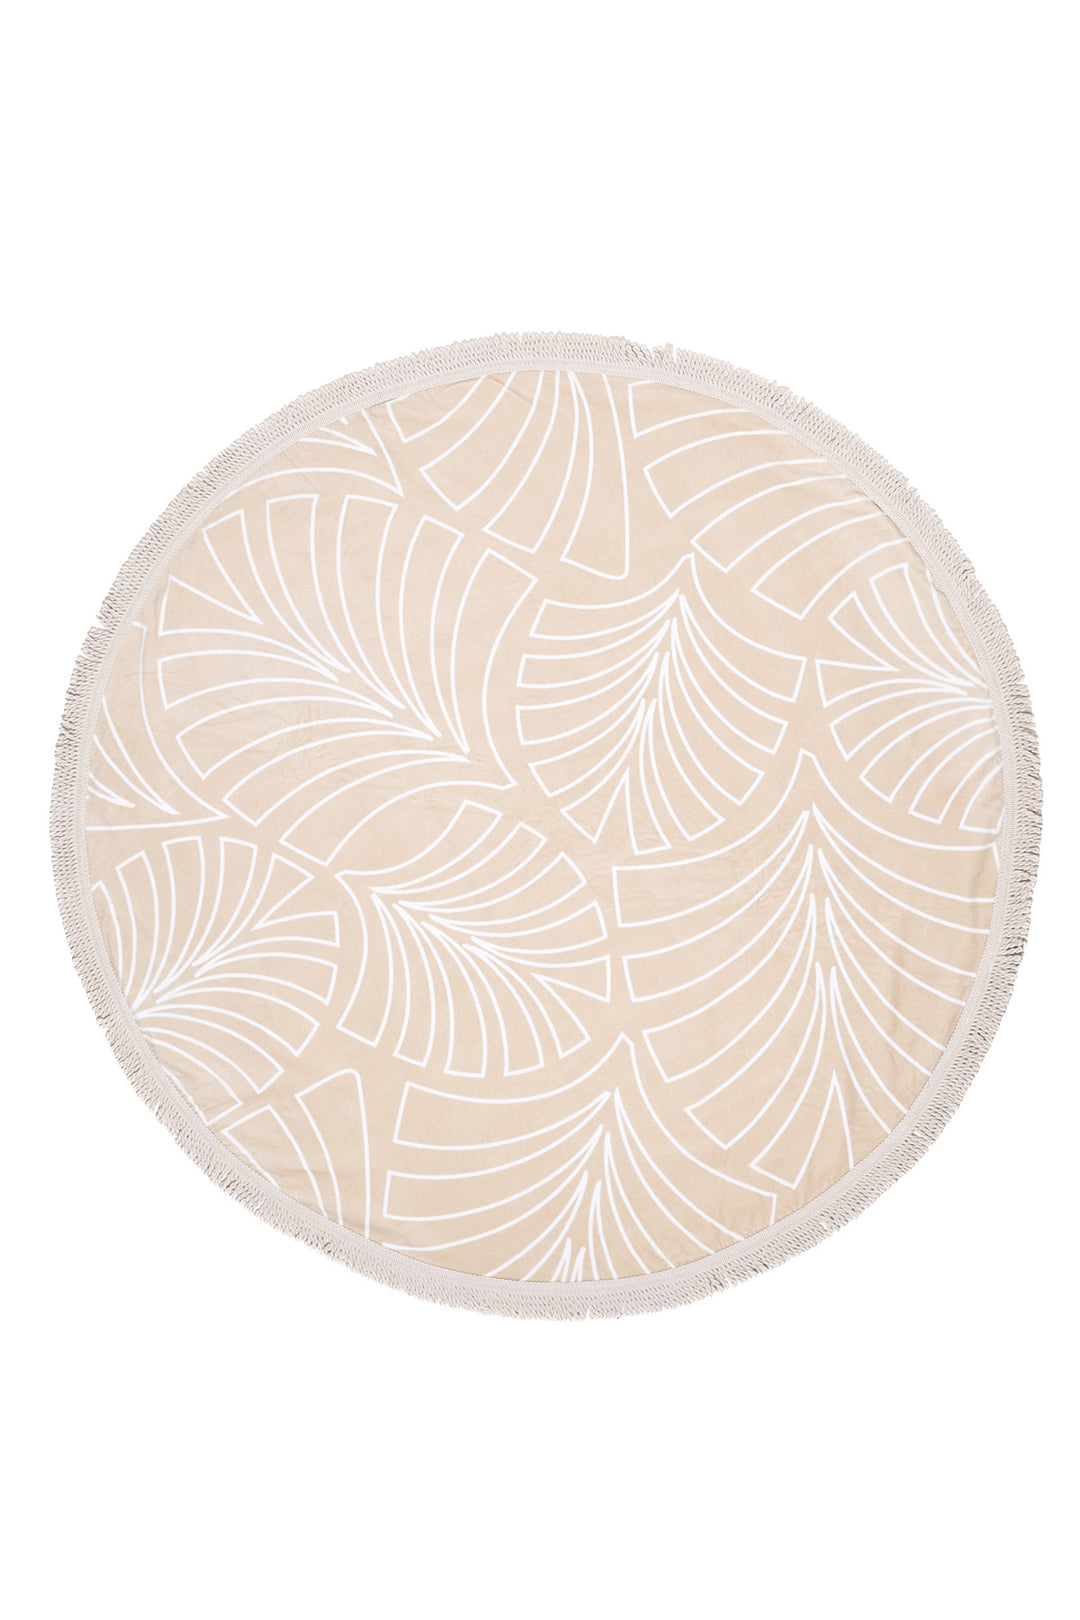 THE PALM | Velour Round Towel